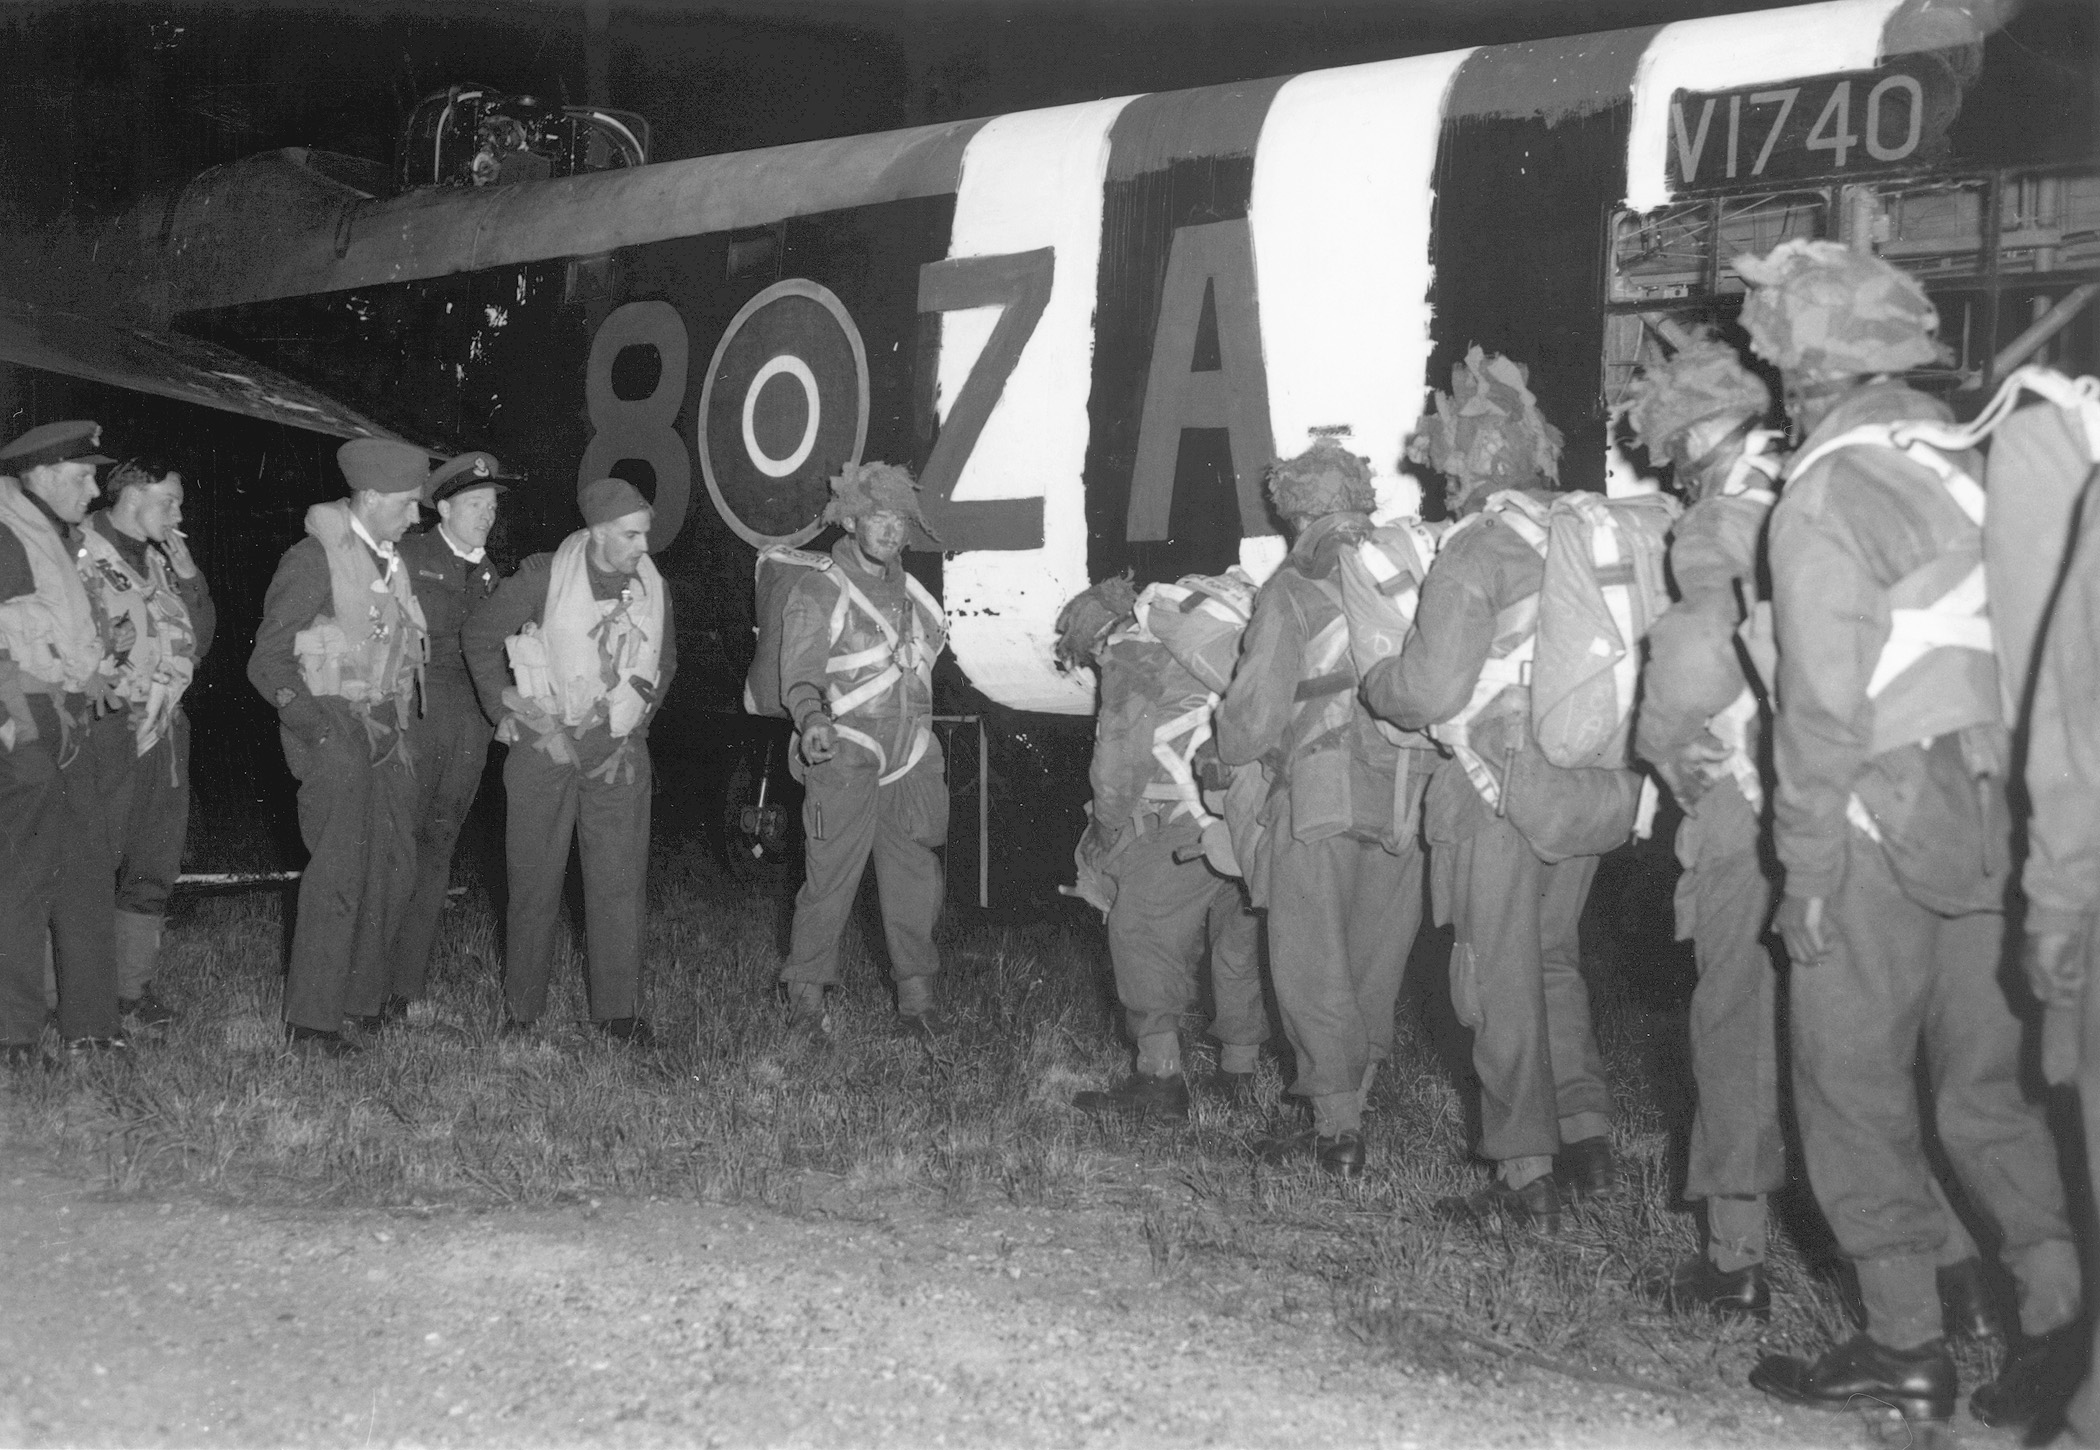 Paras begin boarding a converted RAF Albemarle bomber. Men of the first wave, these troops descended on the Norman countryside just after midnight on June 6, 1944. Invasion stripes, painted for ease of identification, are plainly visible on the aircraft’s fuselage.